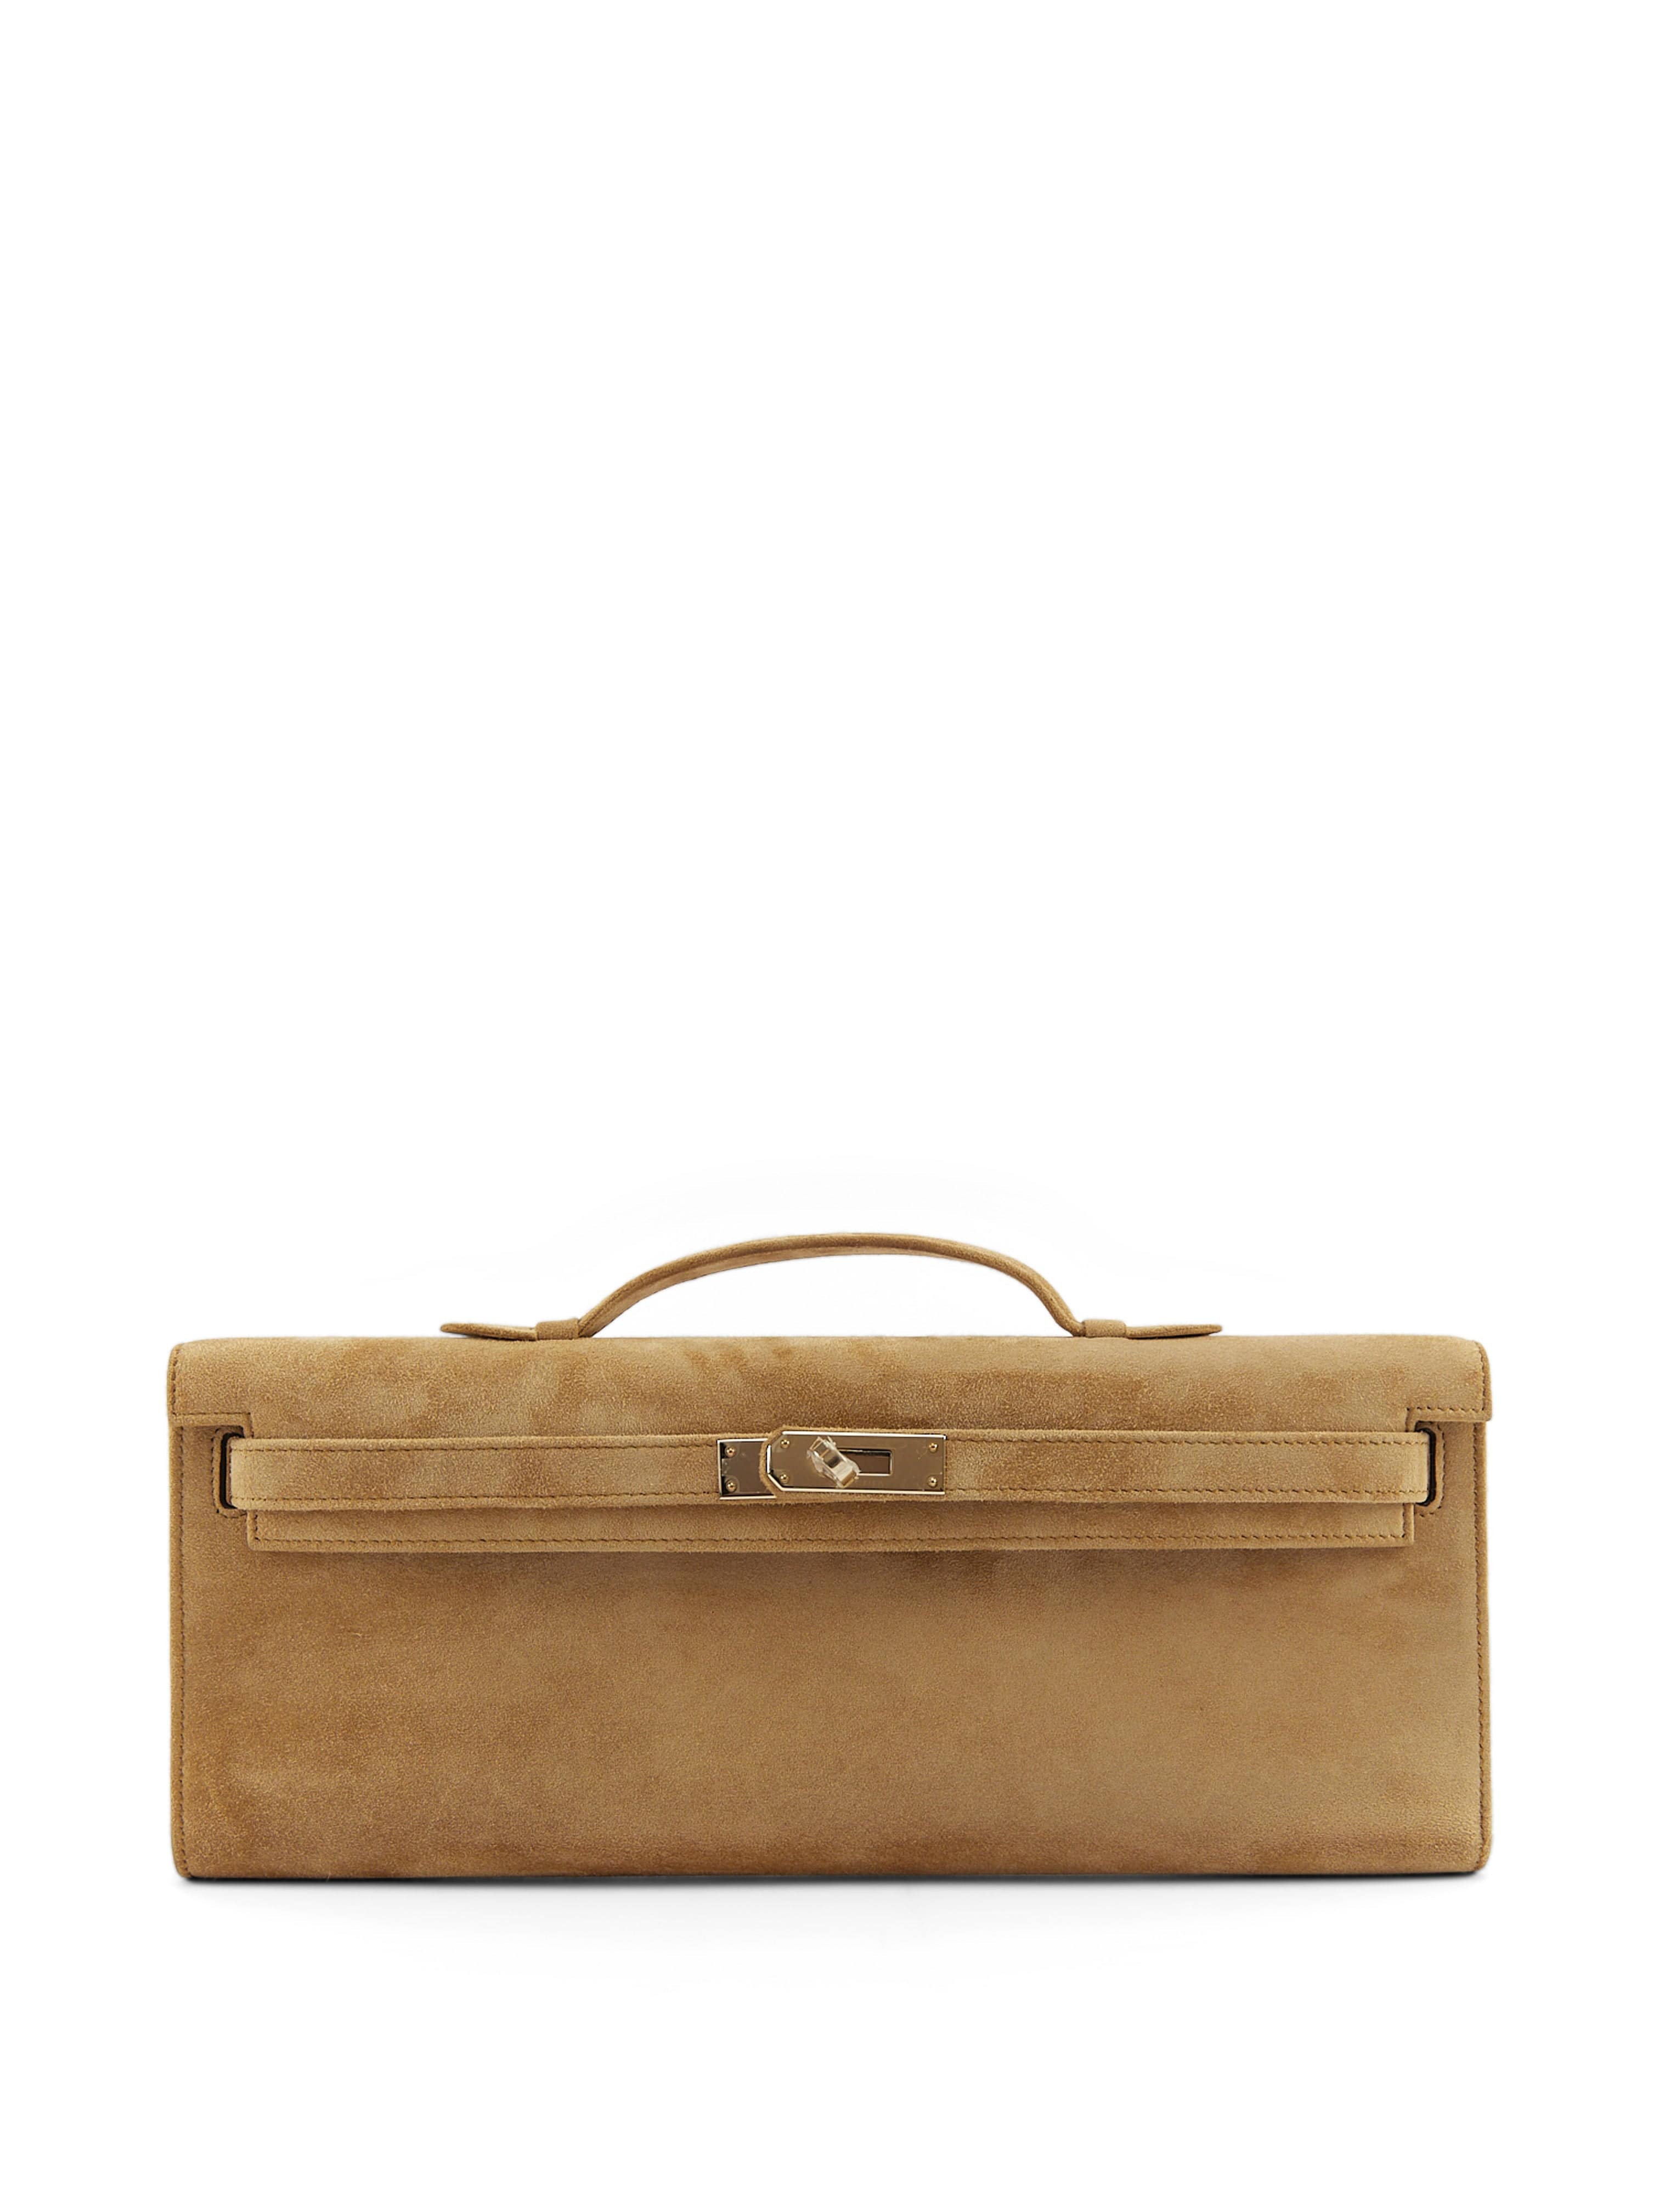 LuxuryVault HERMÈS KELLY CUT OCRE Suede Leather with Permabrass Hardware